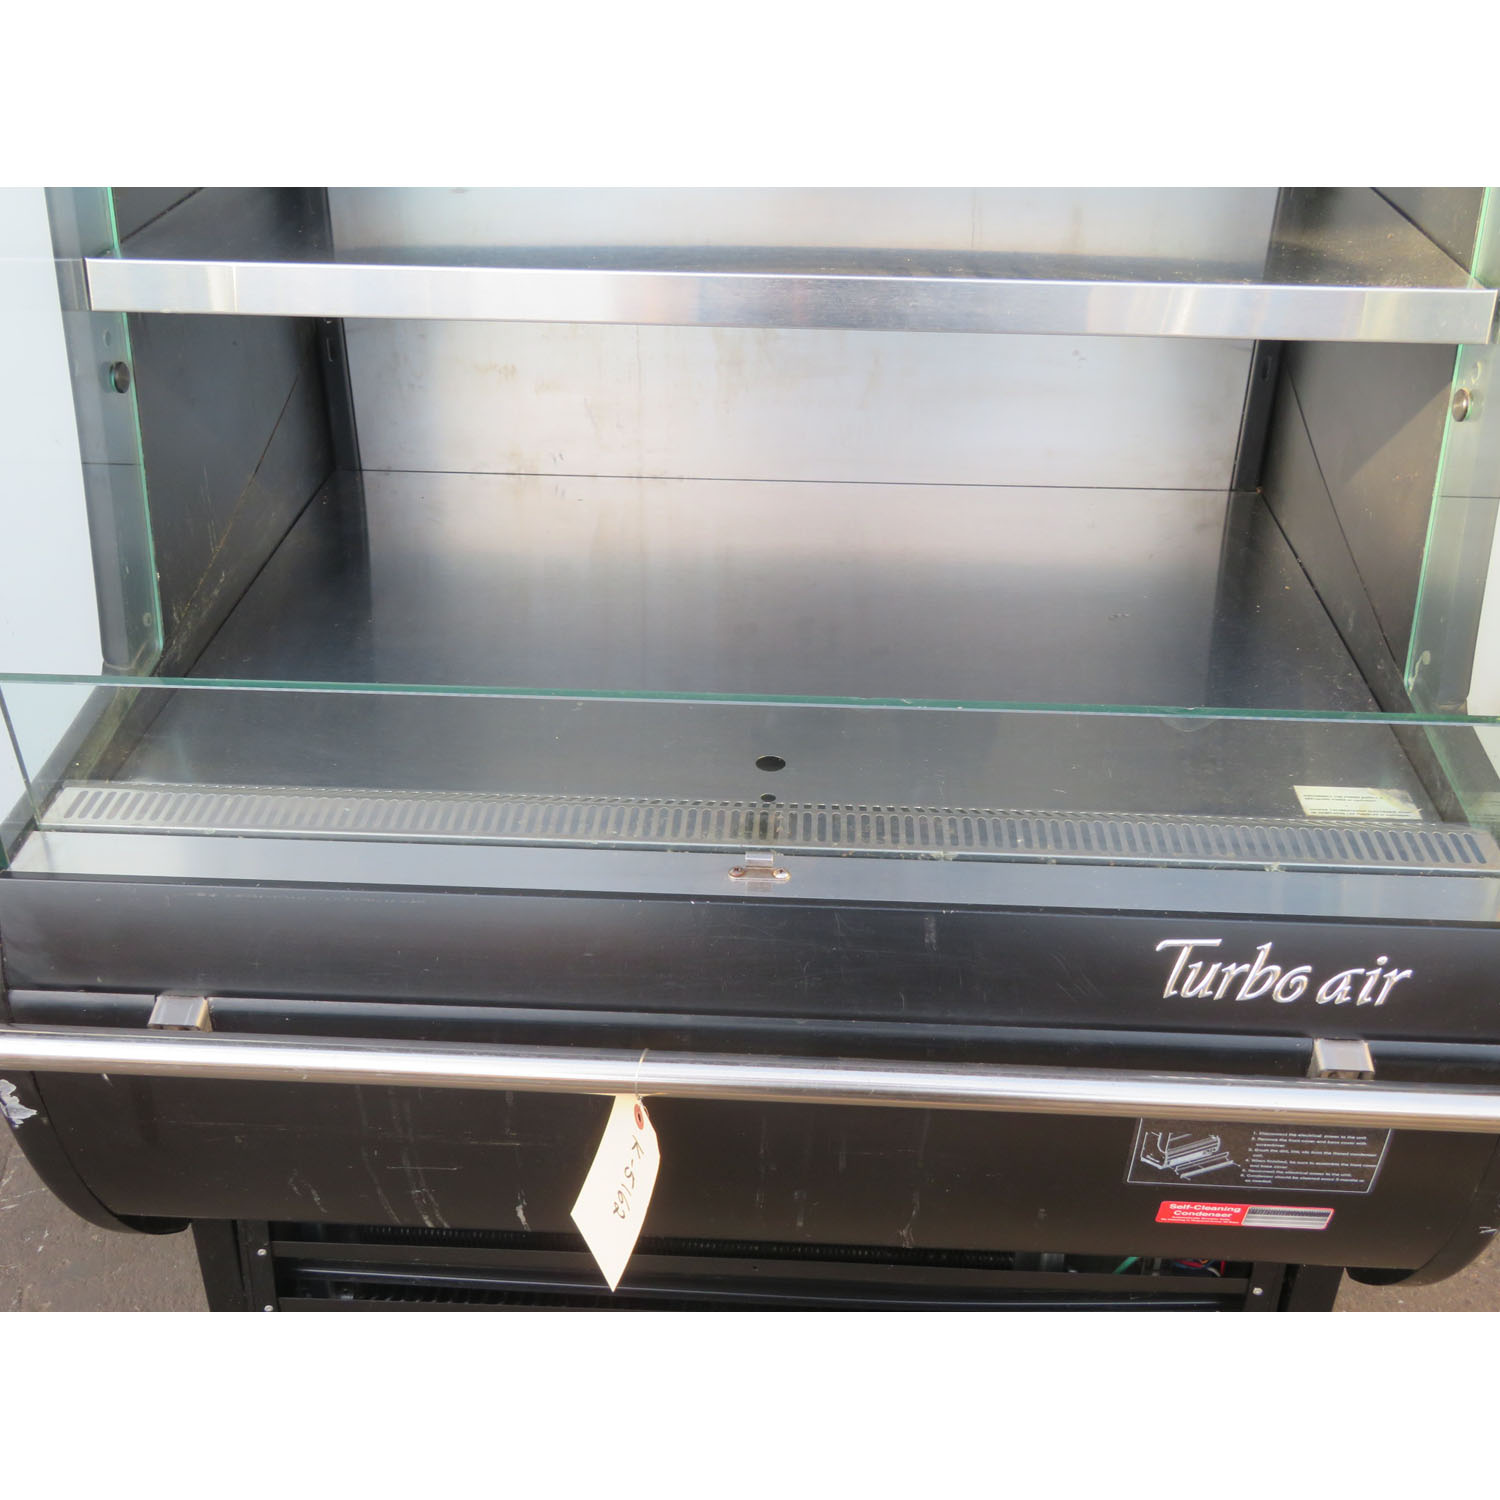 Turbo Air TOM-36DXB 36" Open Case Refrigerator, Used Excellent Condition image 1